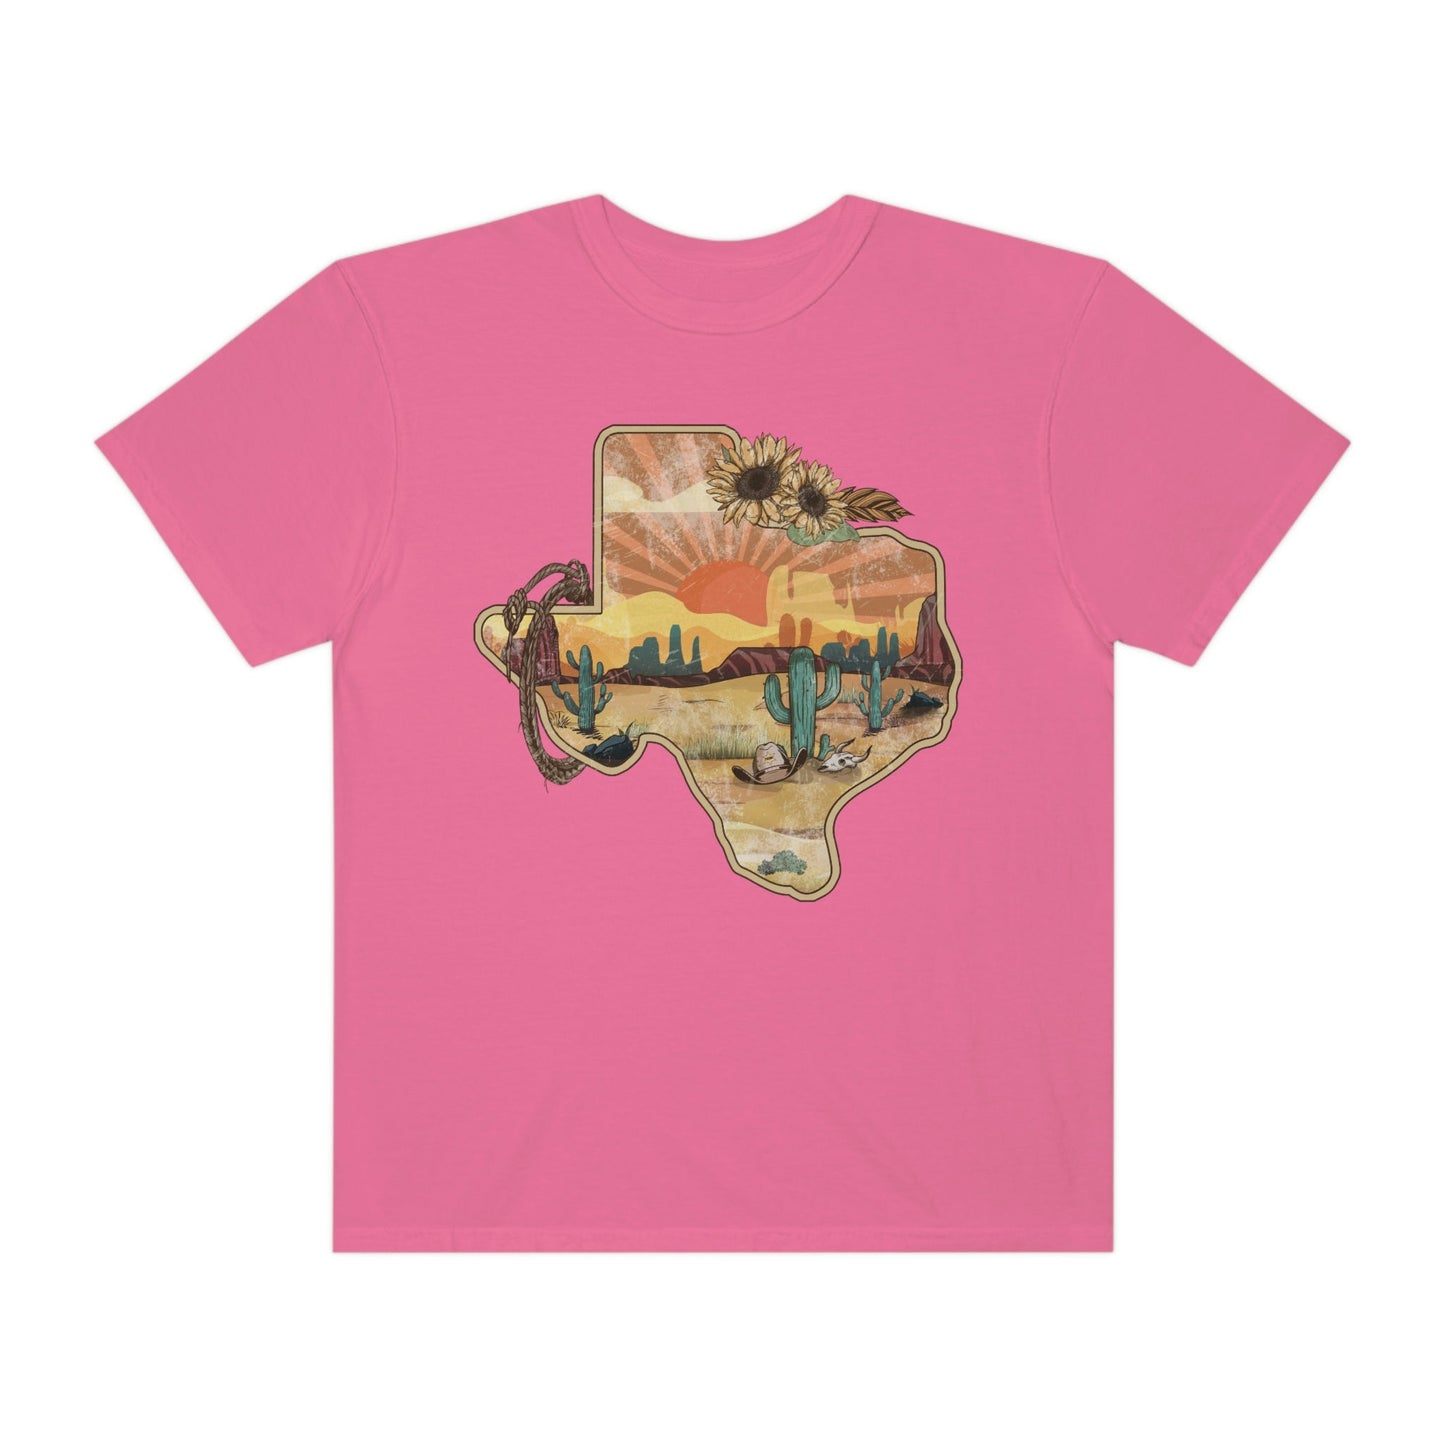 Texas Western Shirt, Comfort Colors Western Graphic Tee | Cowgirl T-Shirt